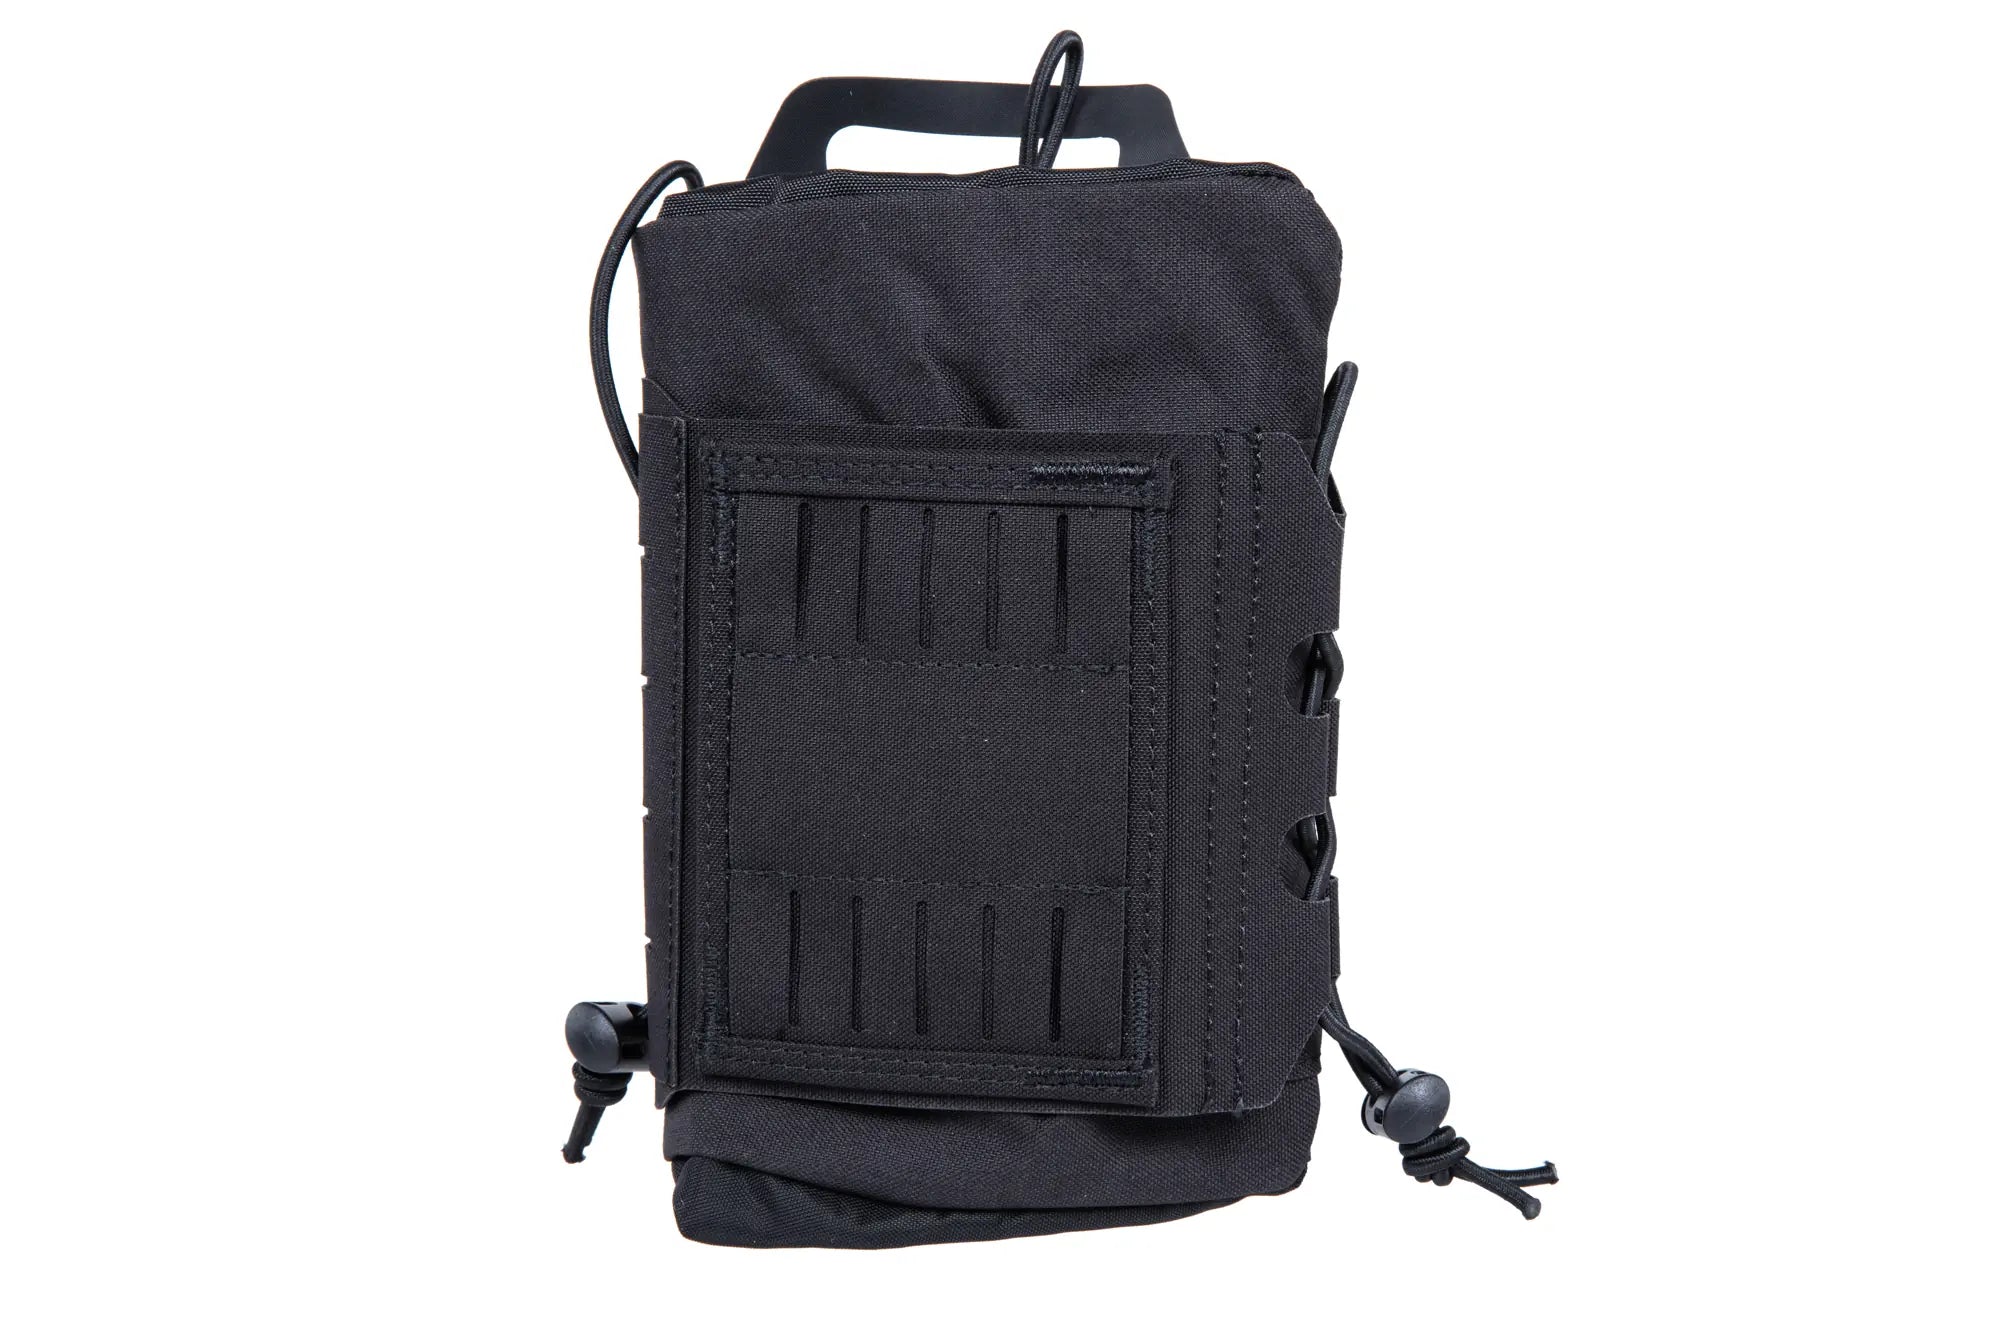 Tactical rip-off first aid kit Wosport Black-2